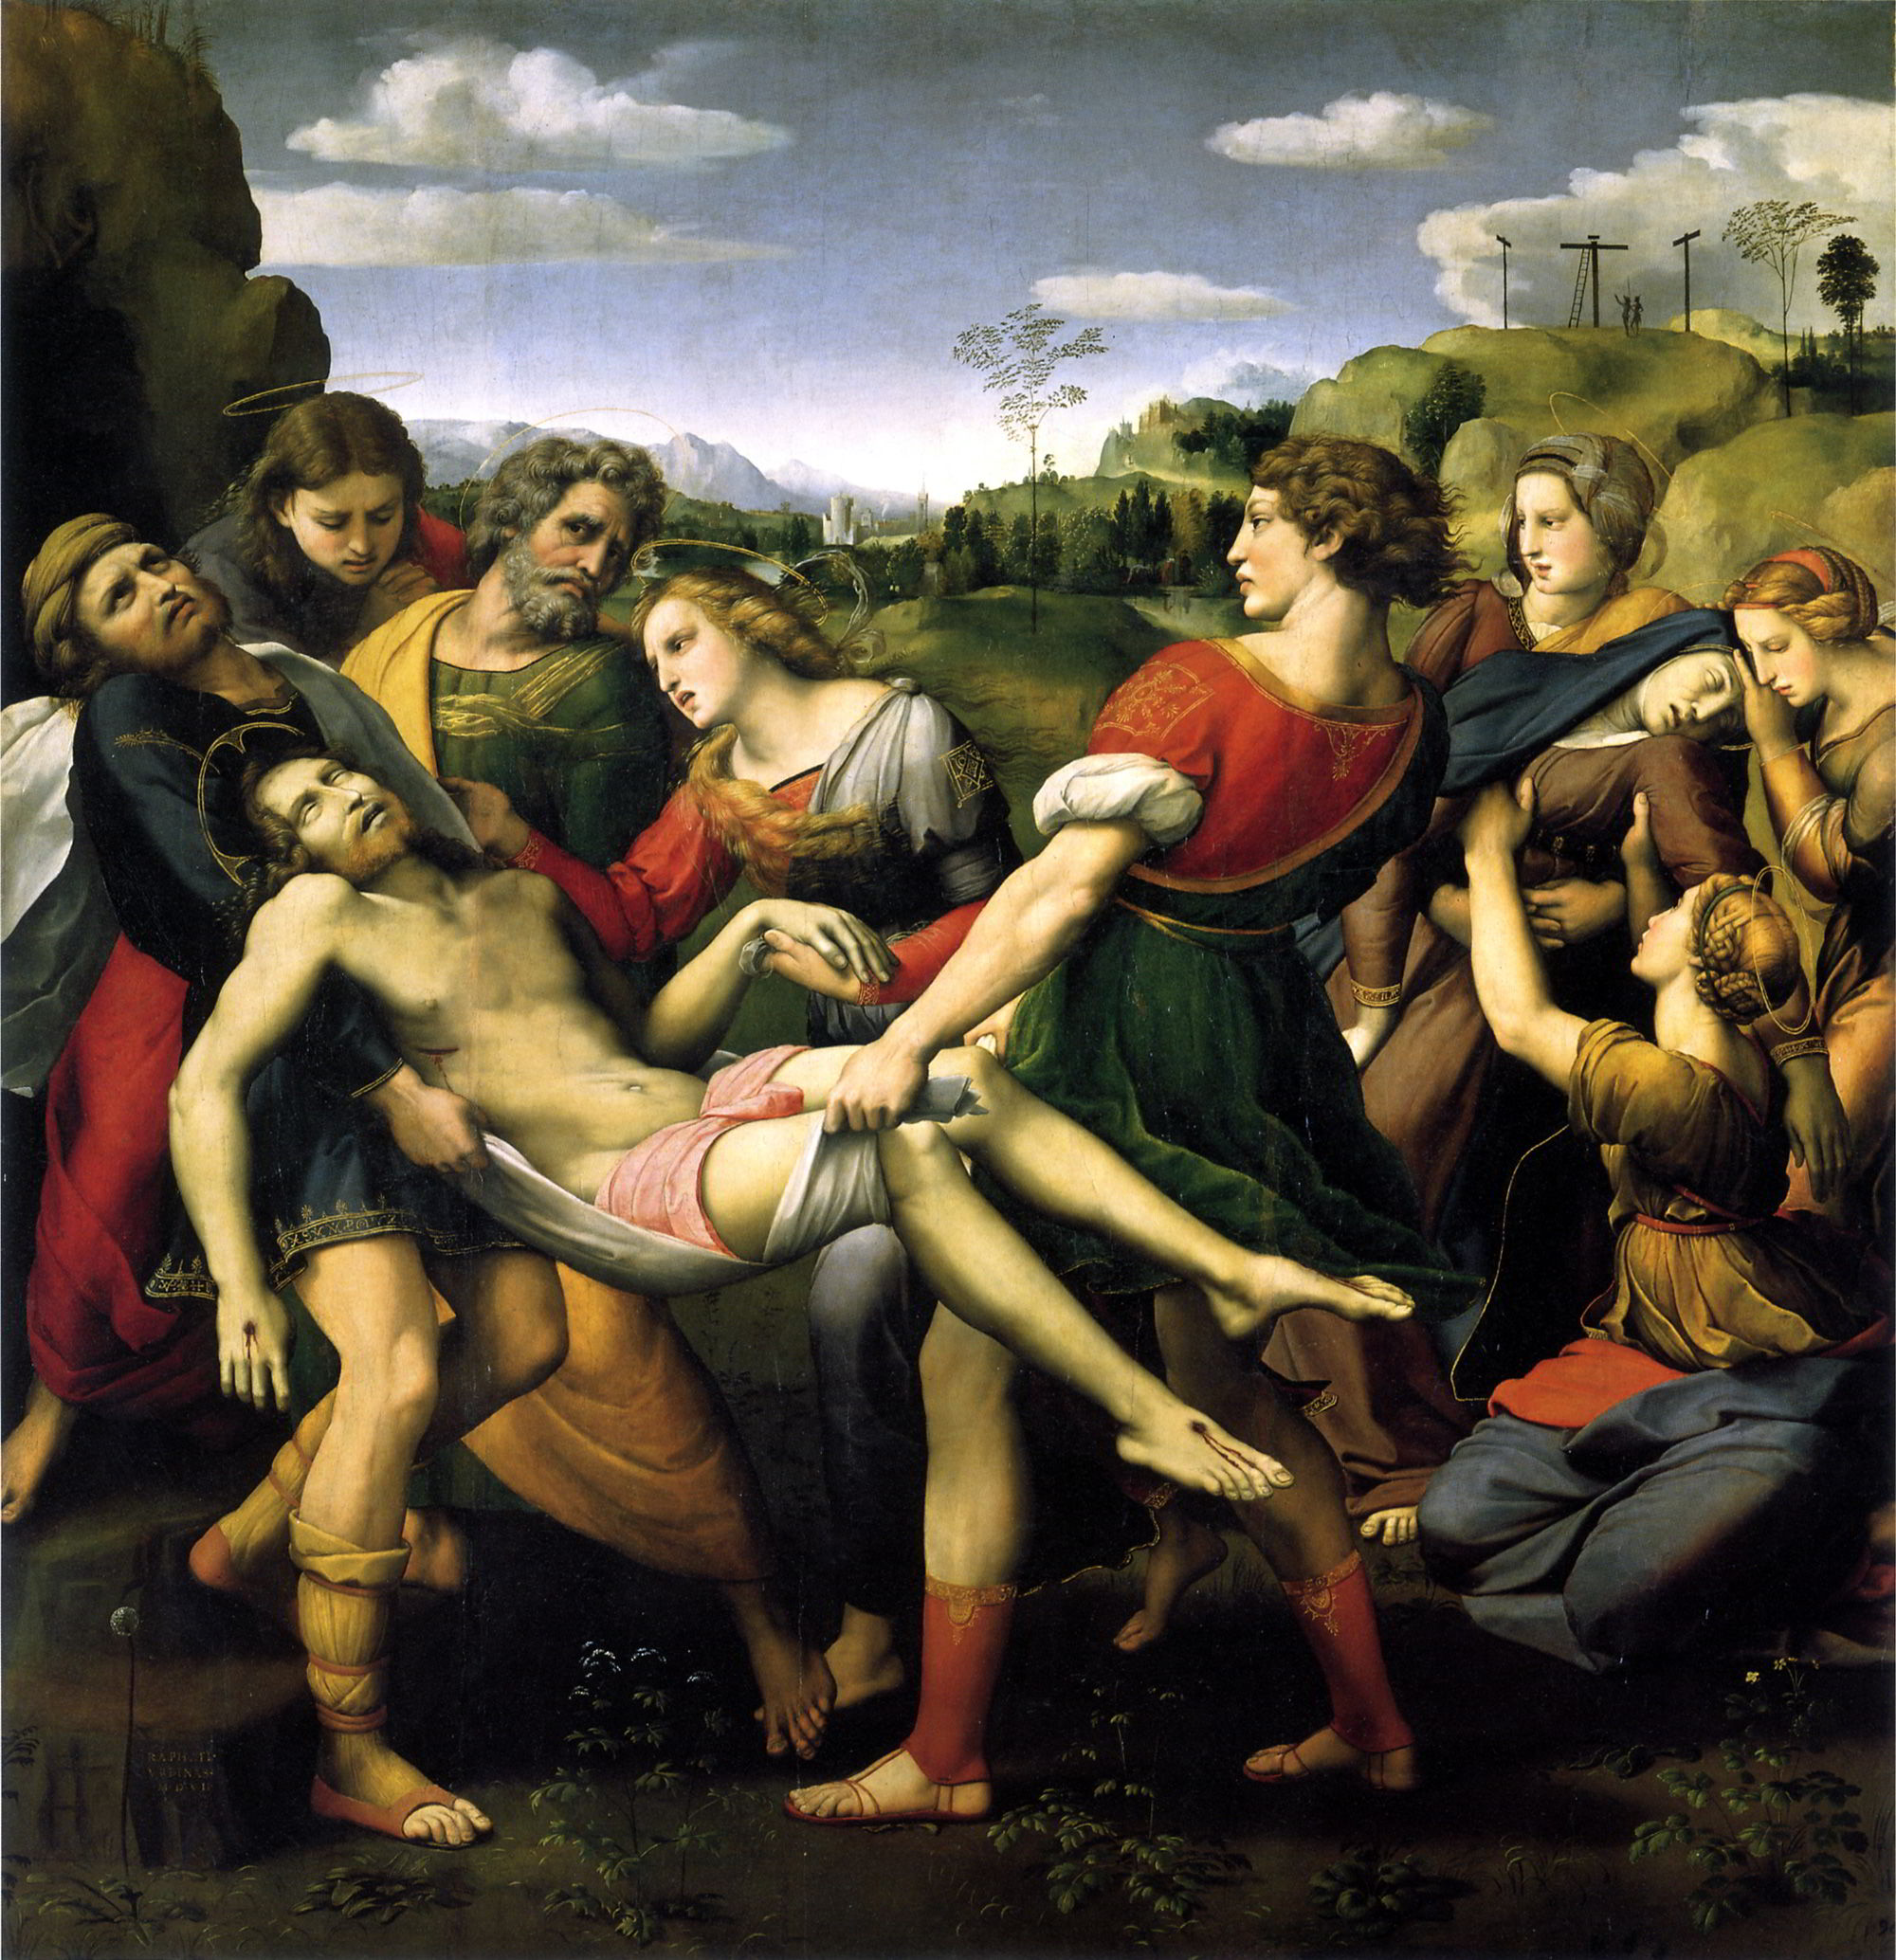 The Deposition of Christ by Raphael